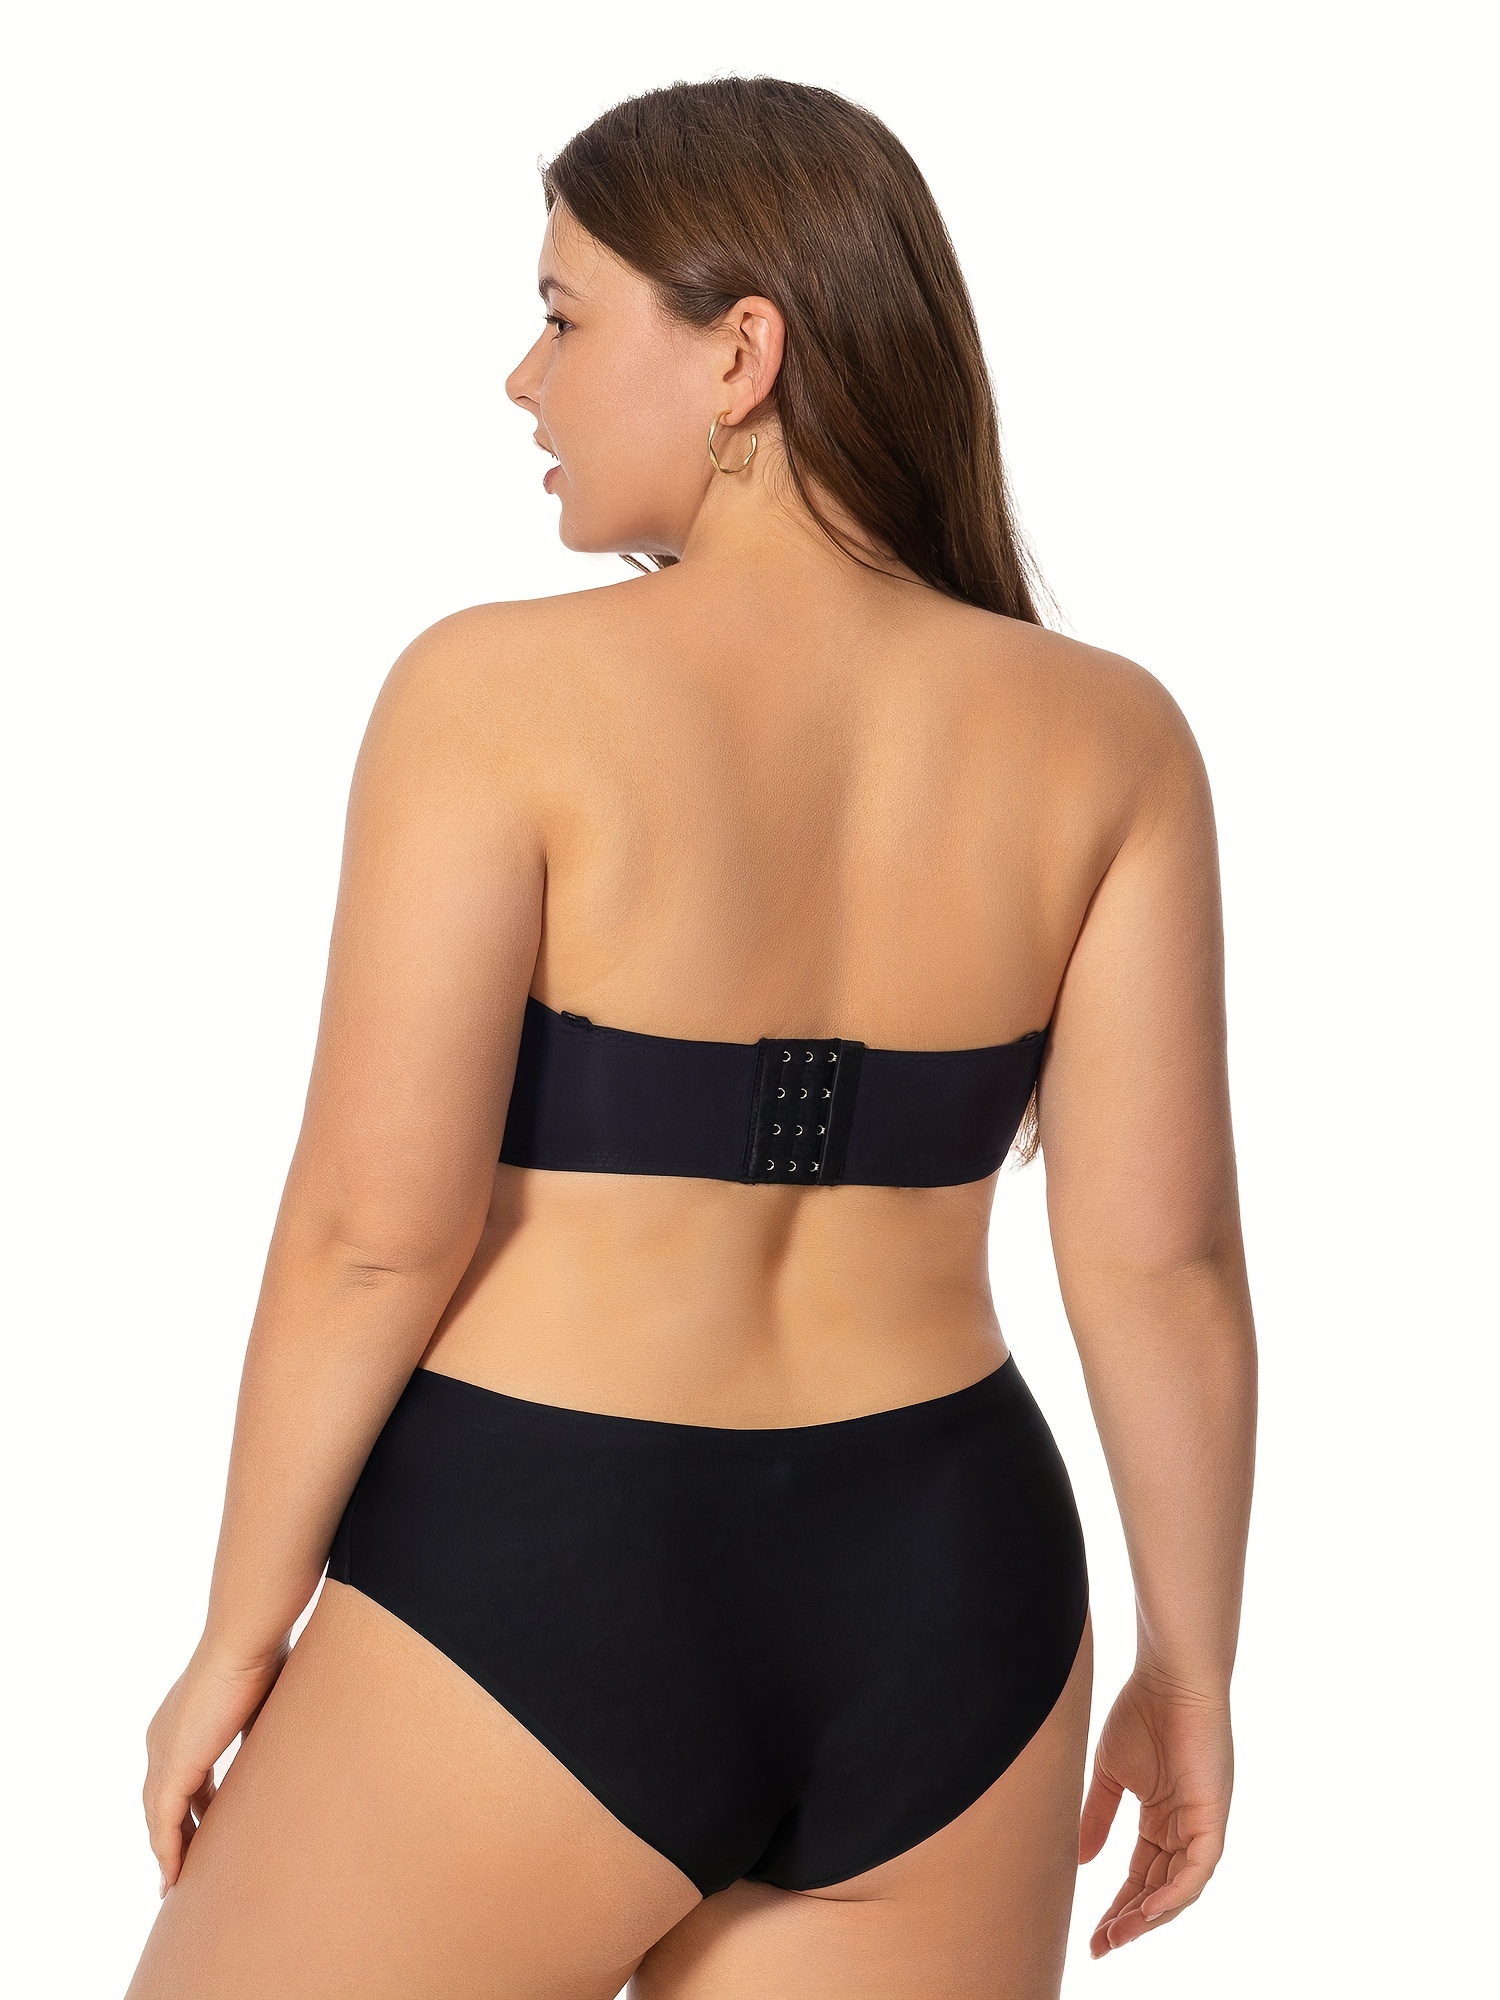 Buy Seamfree Bandeau Bras 2 Pack from Next